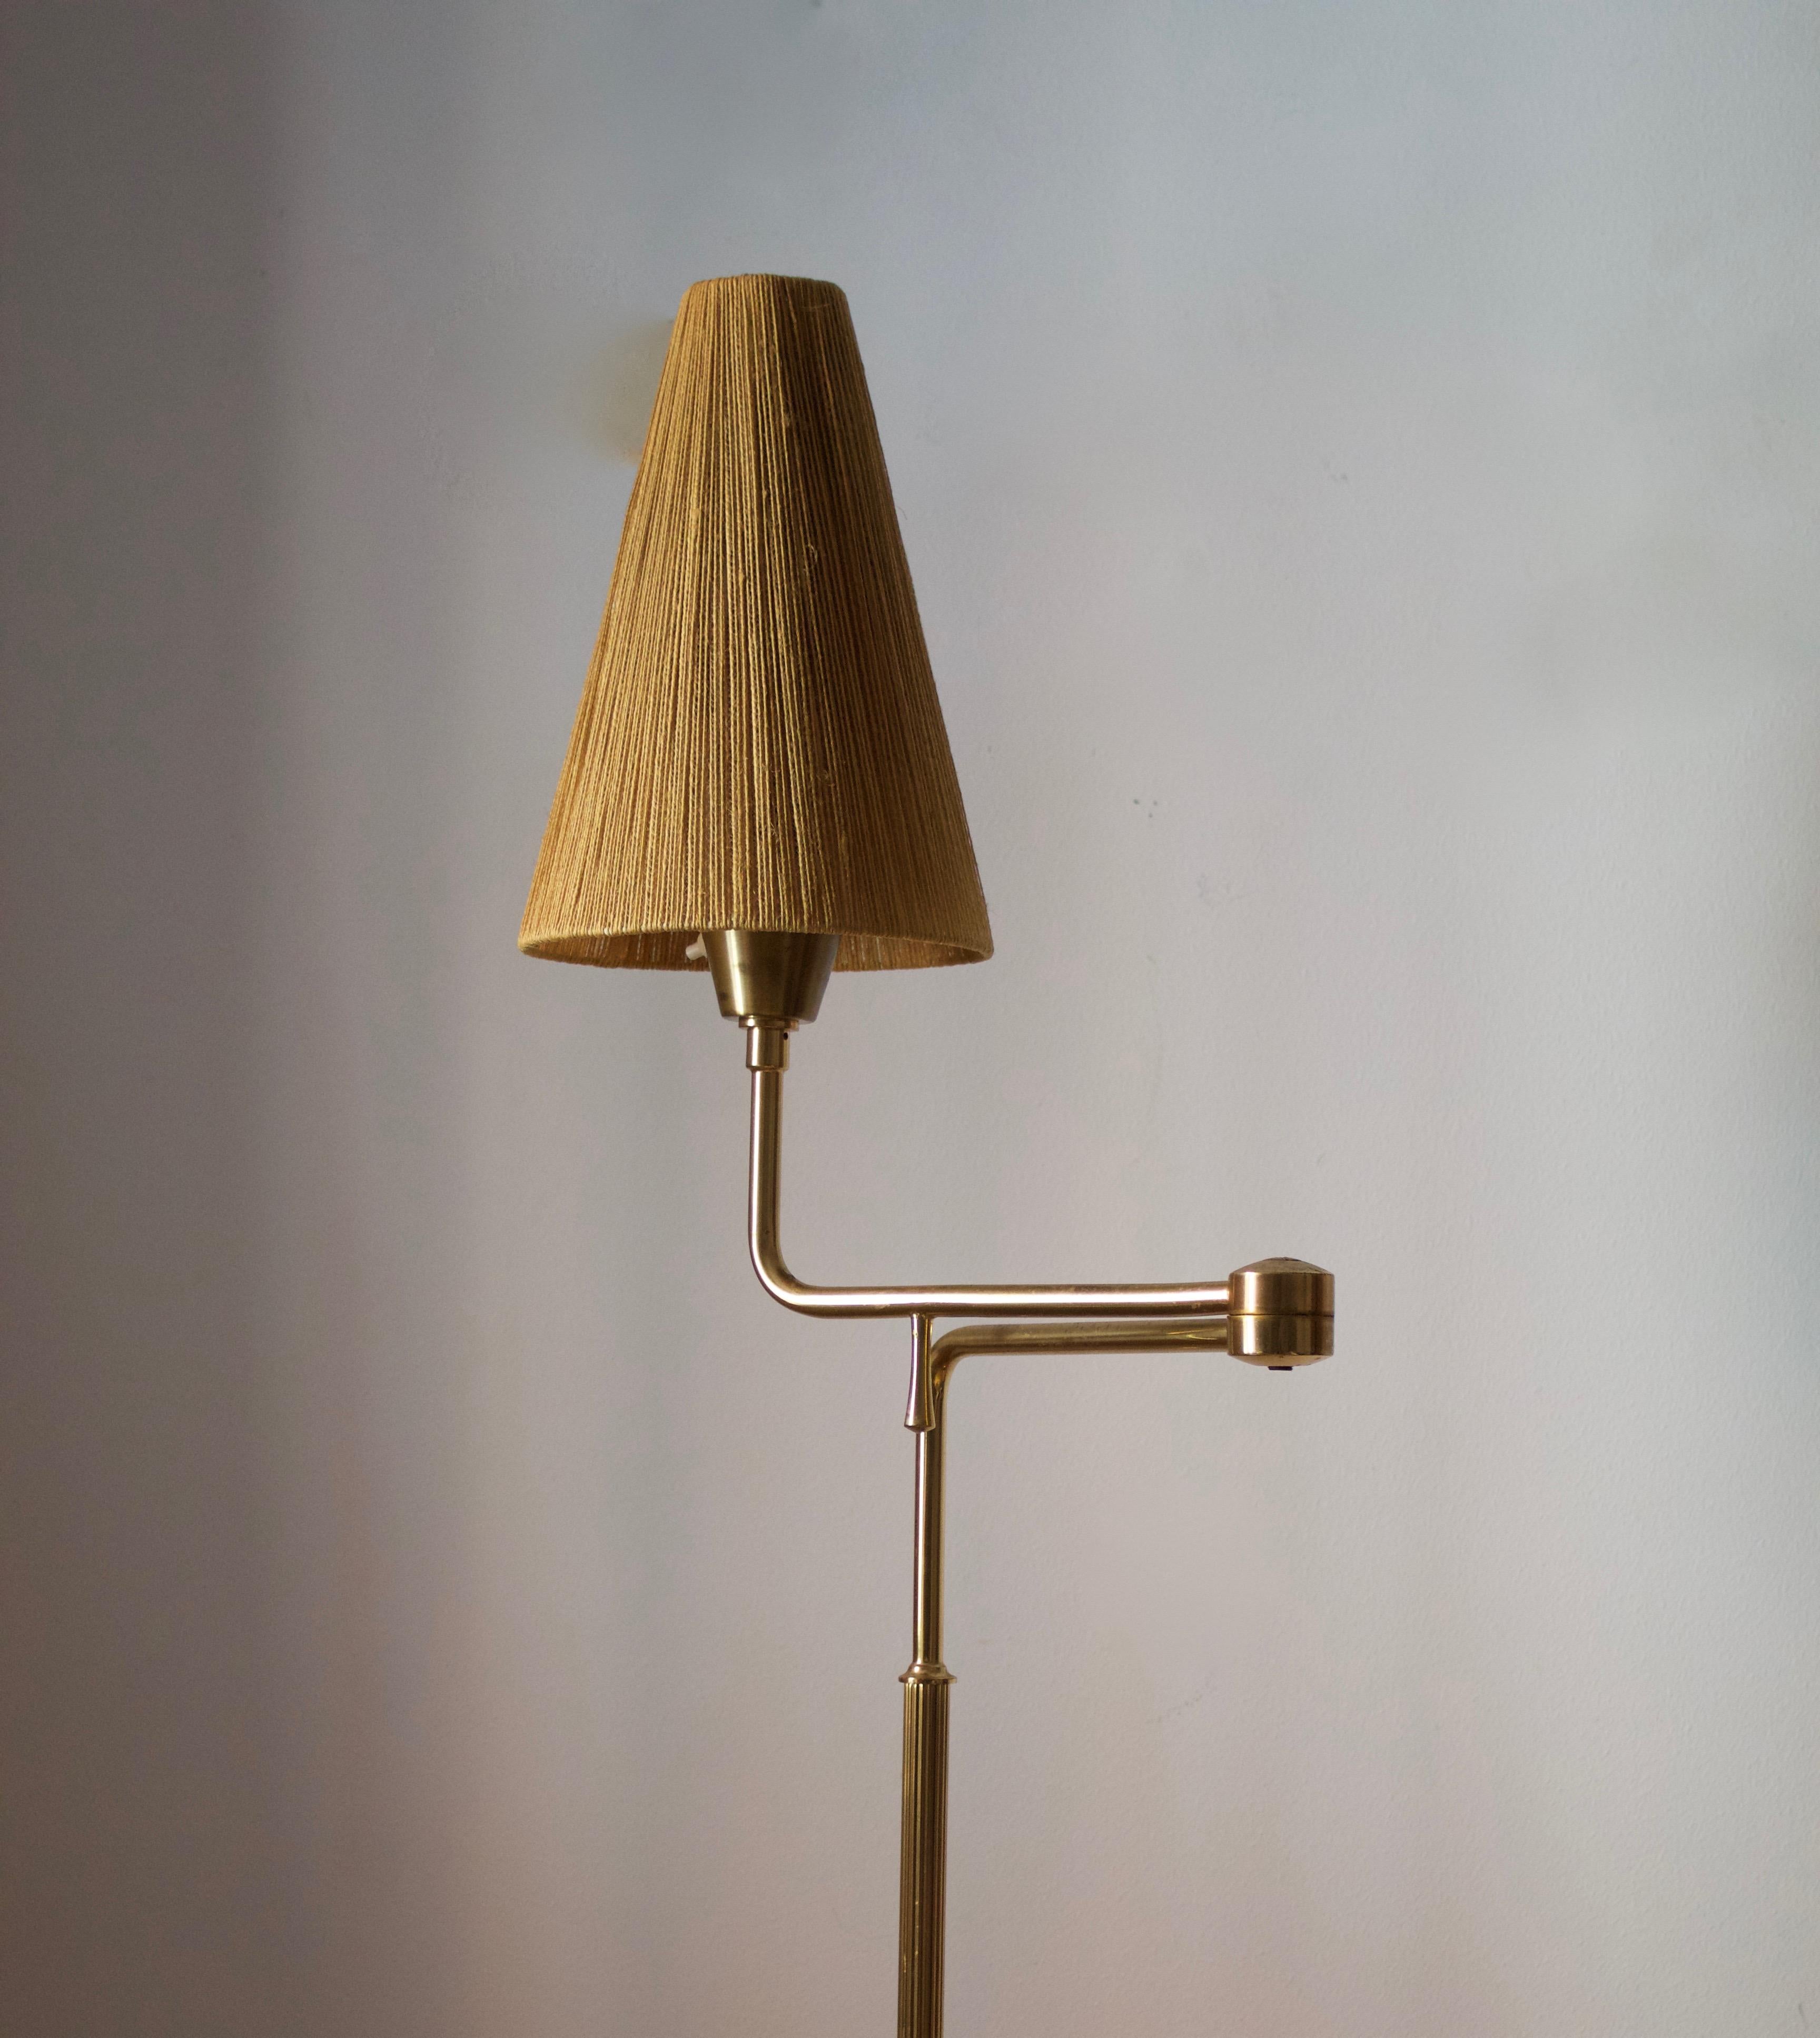 An adjustable floor lamp. Designed and produced in Sweden, c. 1950s-1960s. With a vintage string lampshade.